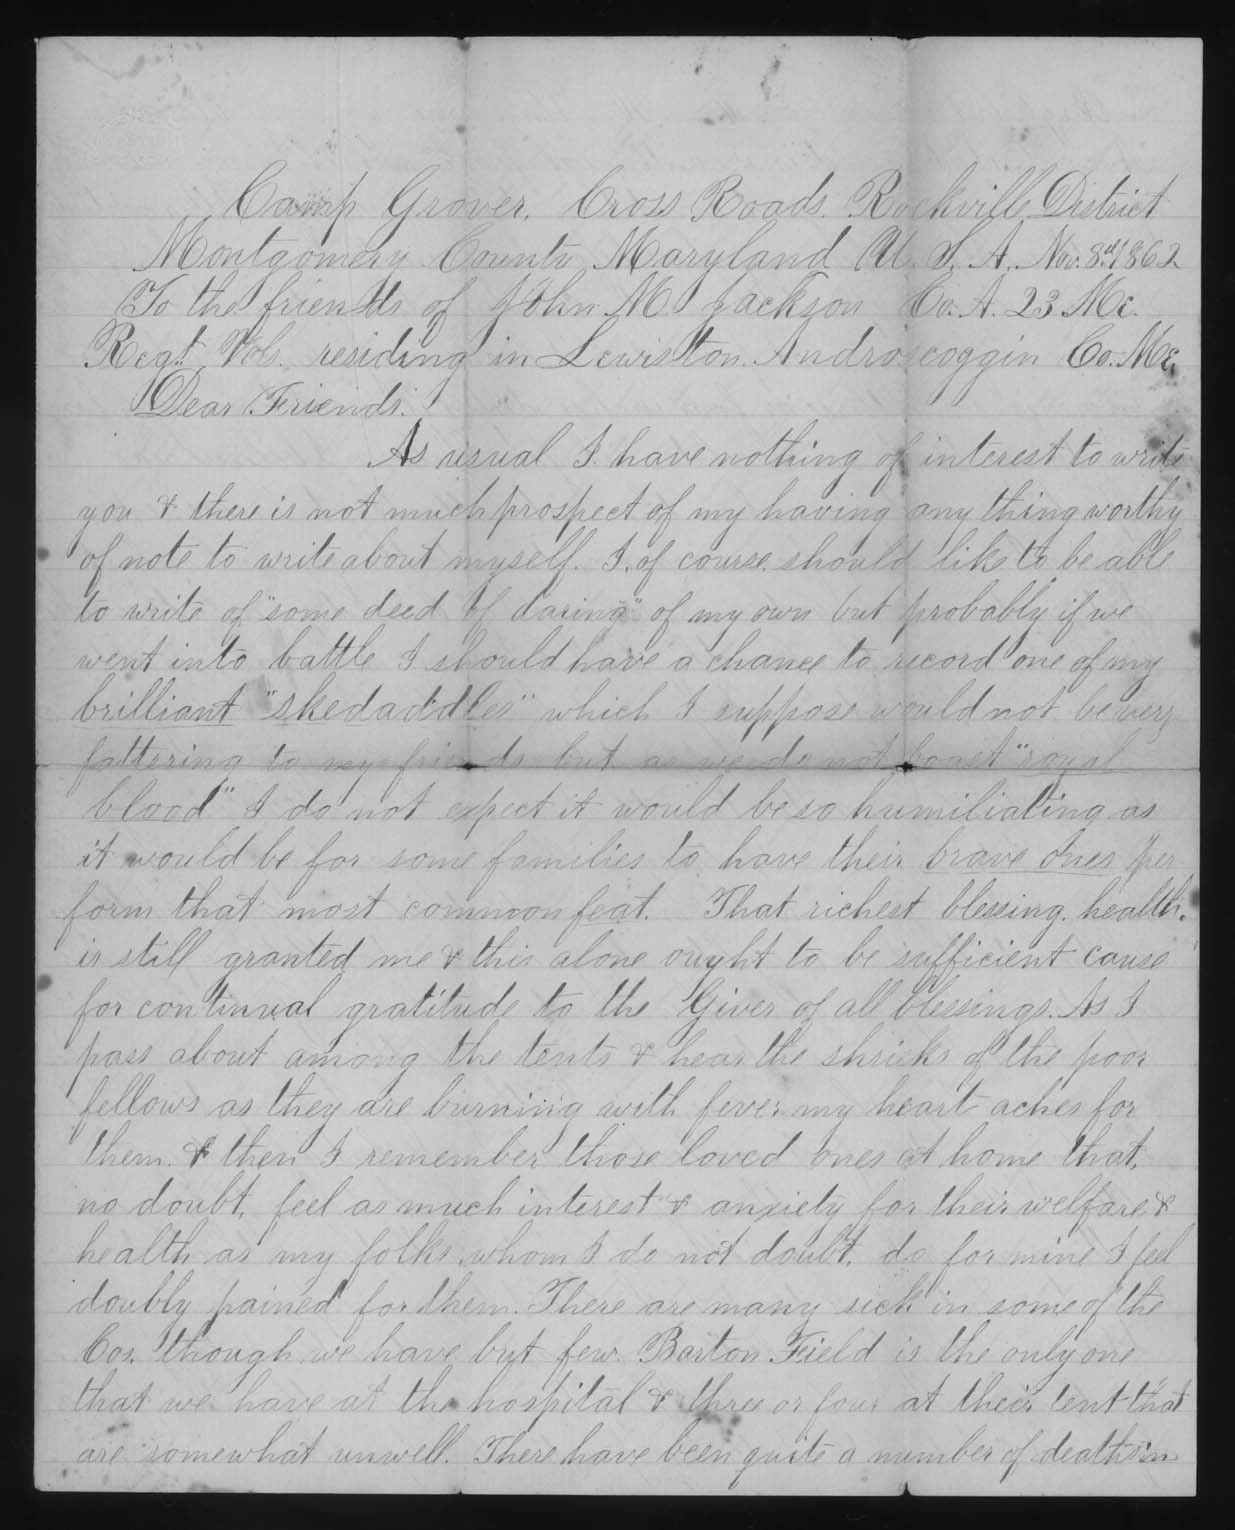 Letter, John M. Jackson, Camp Grover, Montgomery County, Maryland, to Friends of John M. Jackson, Page 1